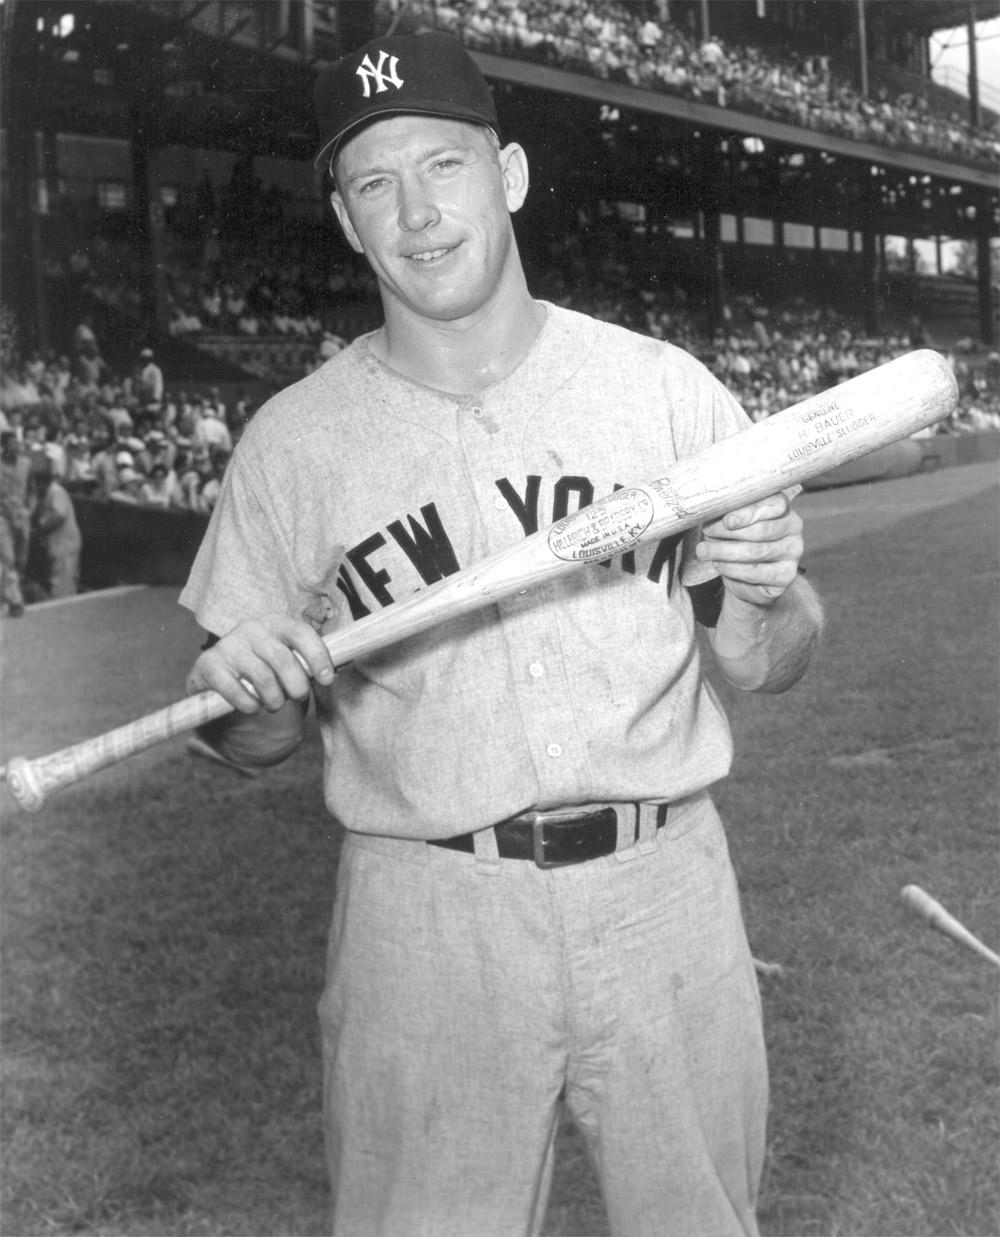 Happy Birthday to my boyhood hero MT Mickey Mantle was born on this day in 1931. 